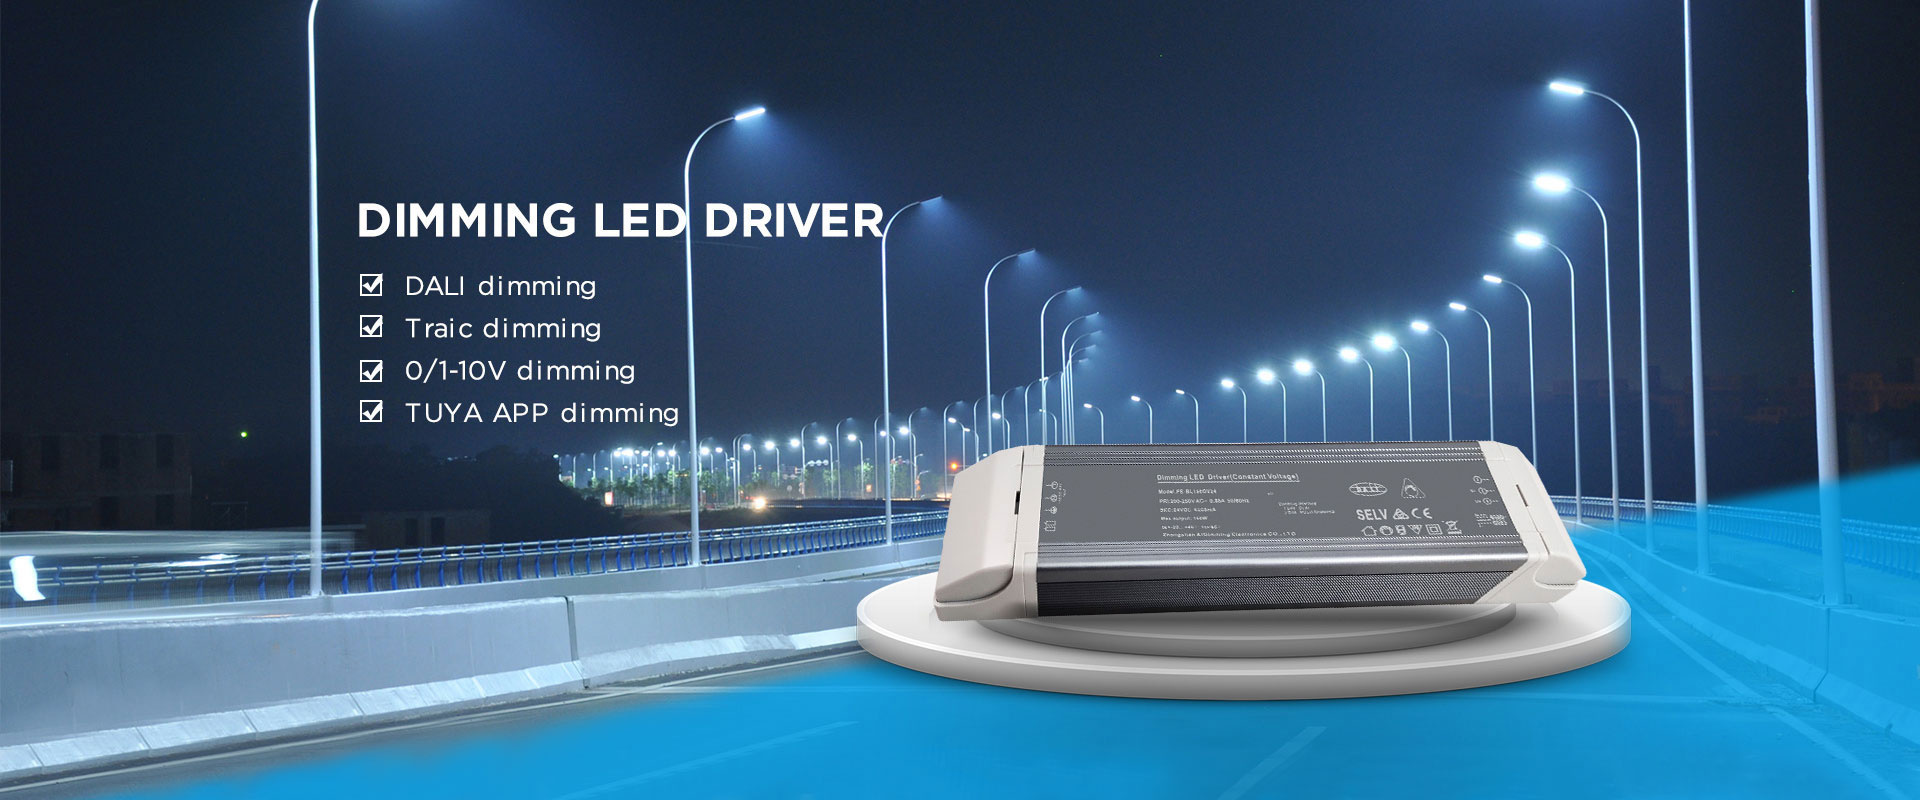 Dimmable Led Driver စက်ရုံ